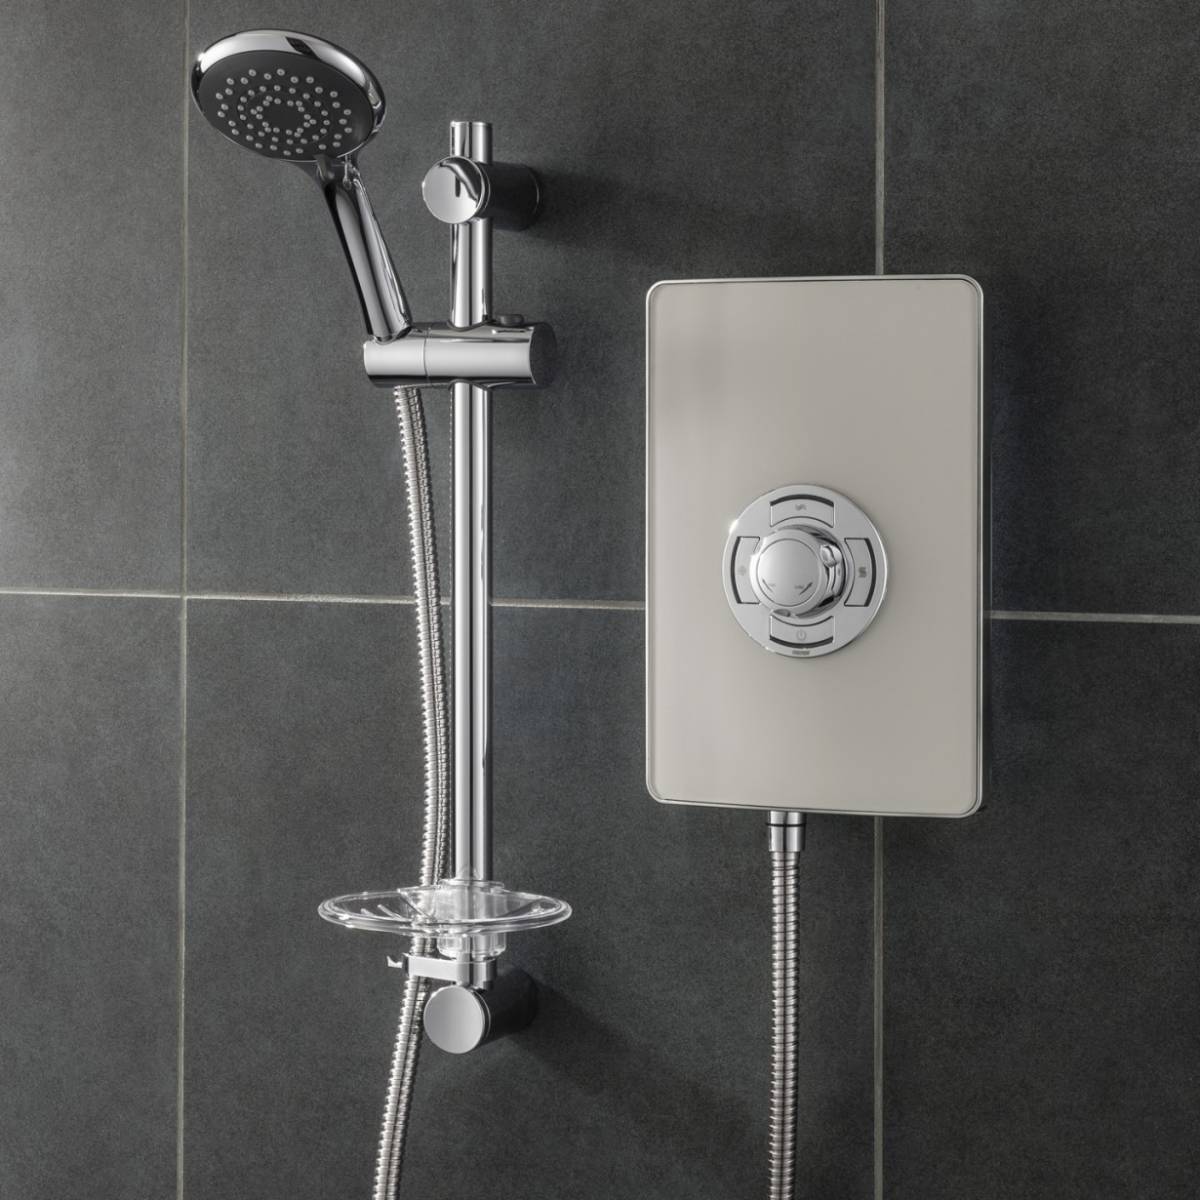 An electric shower